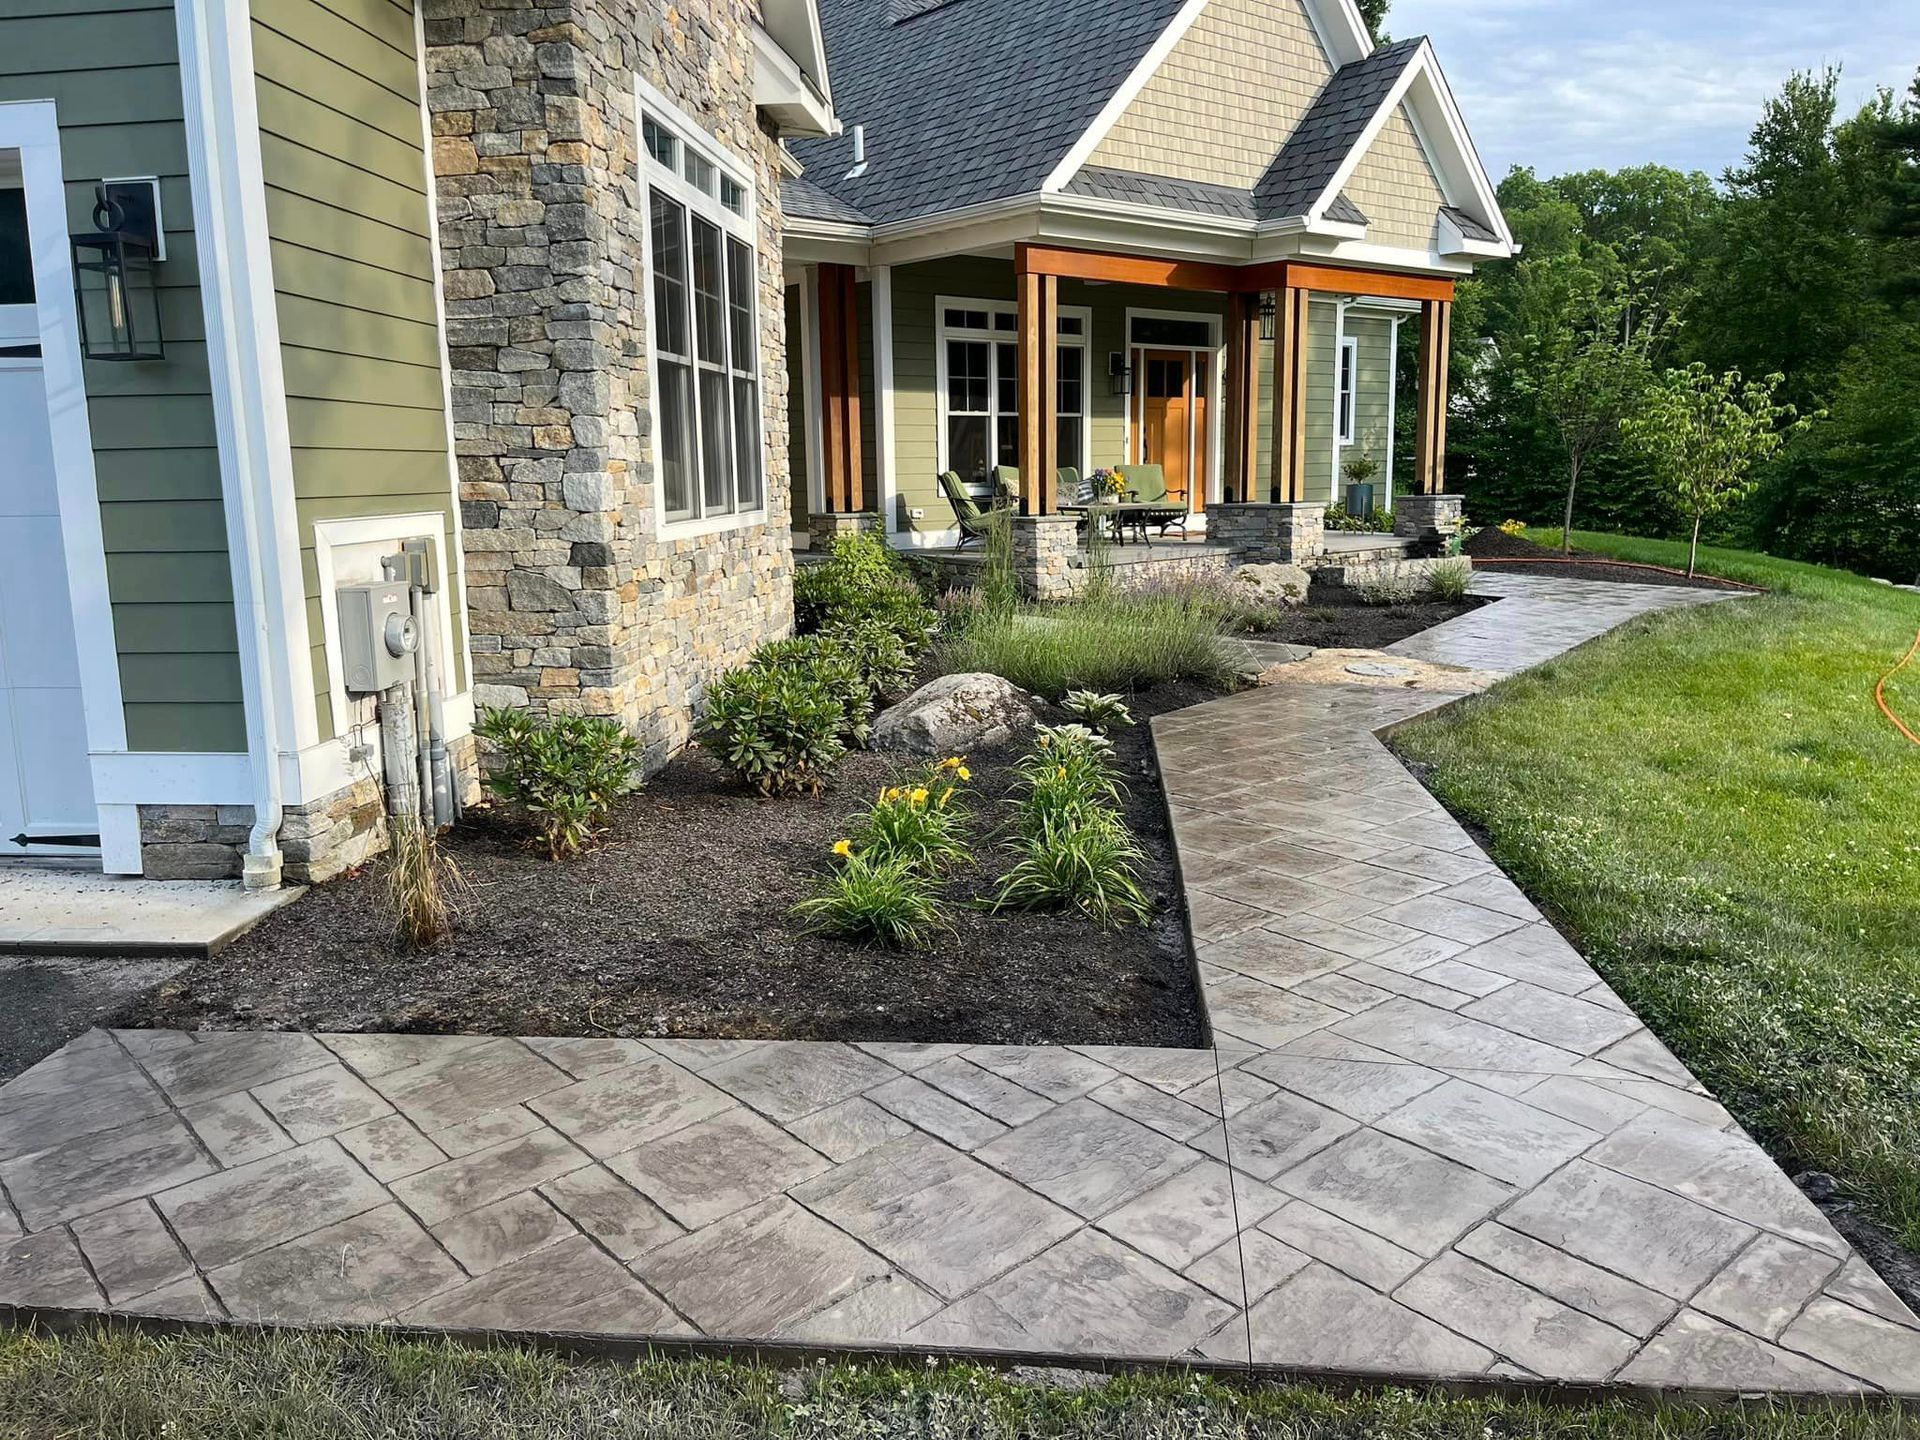 Concrete sidewalk/walkway/pathway installed with flagstone leading from front door to driveway in earth tone colours